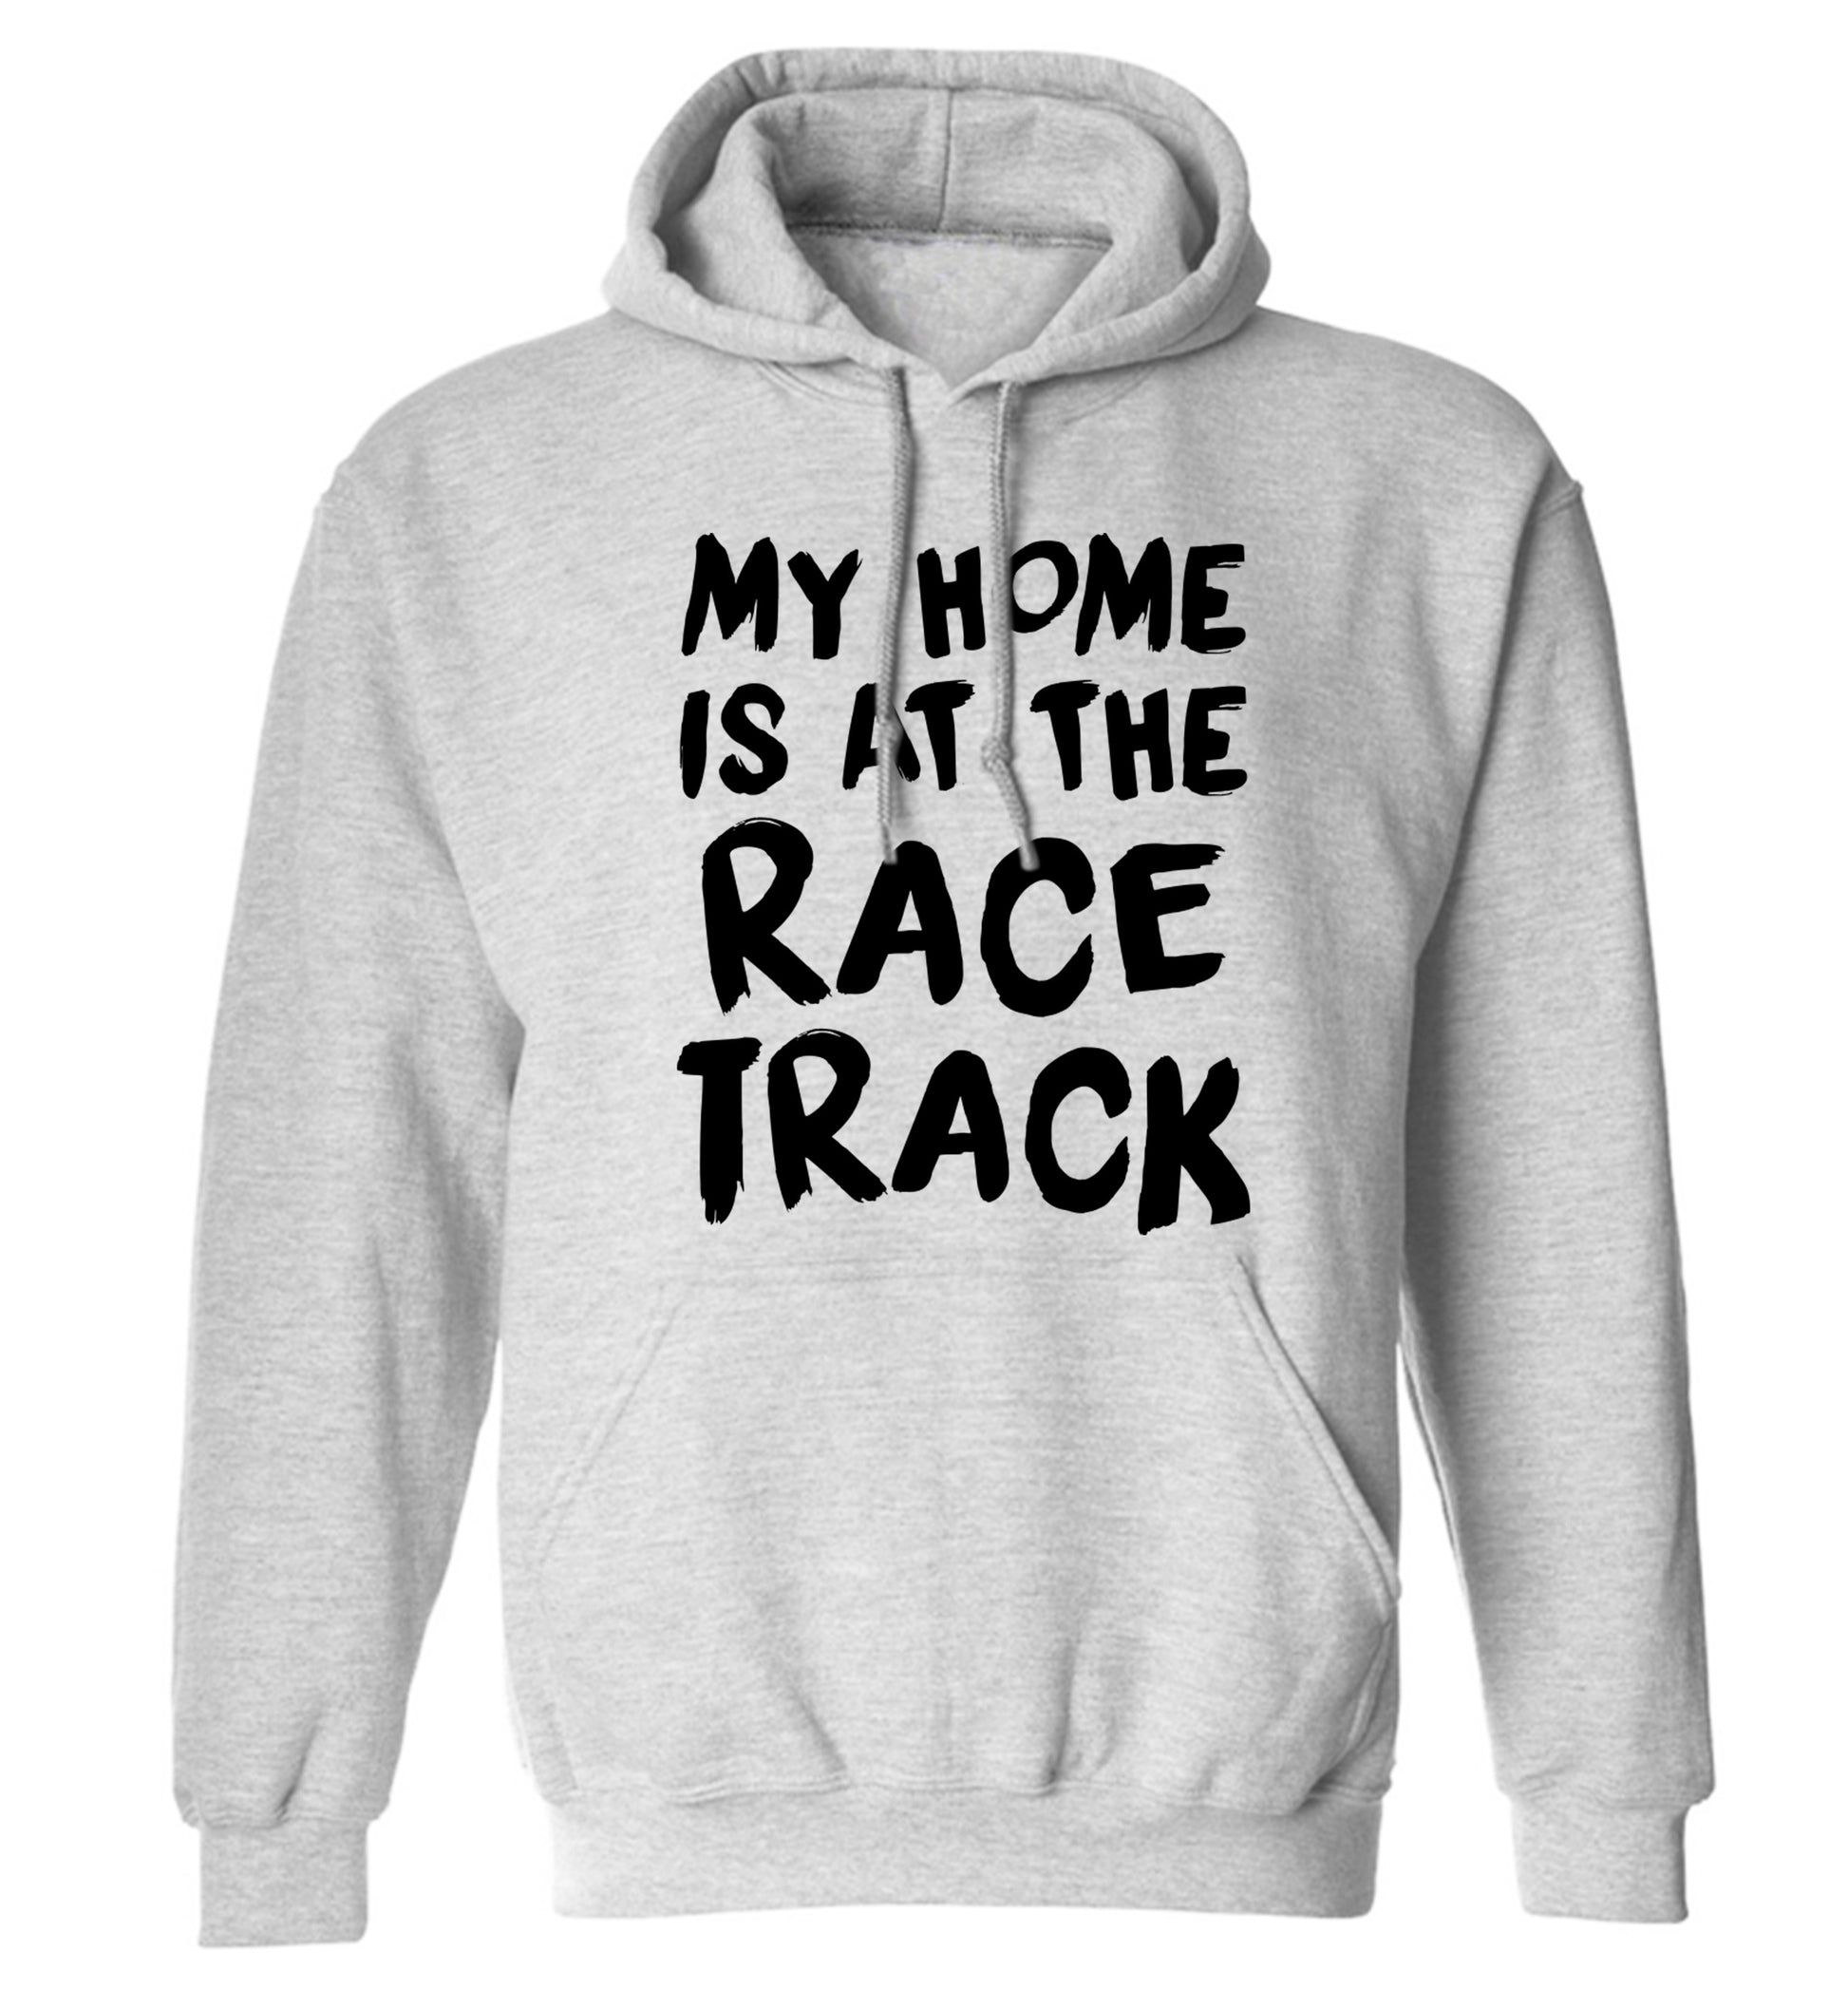 My home is at the race track adults unisex grey hoodie 2XL